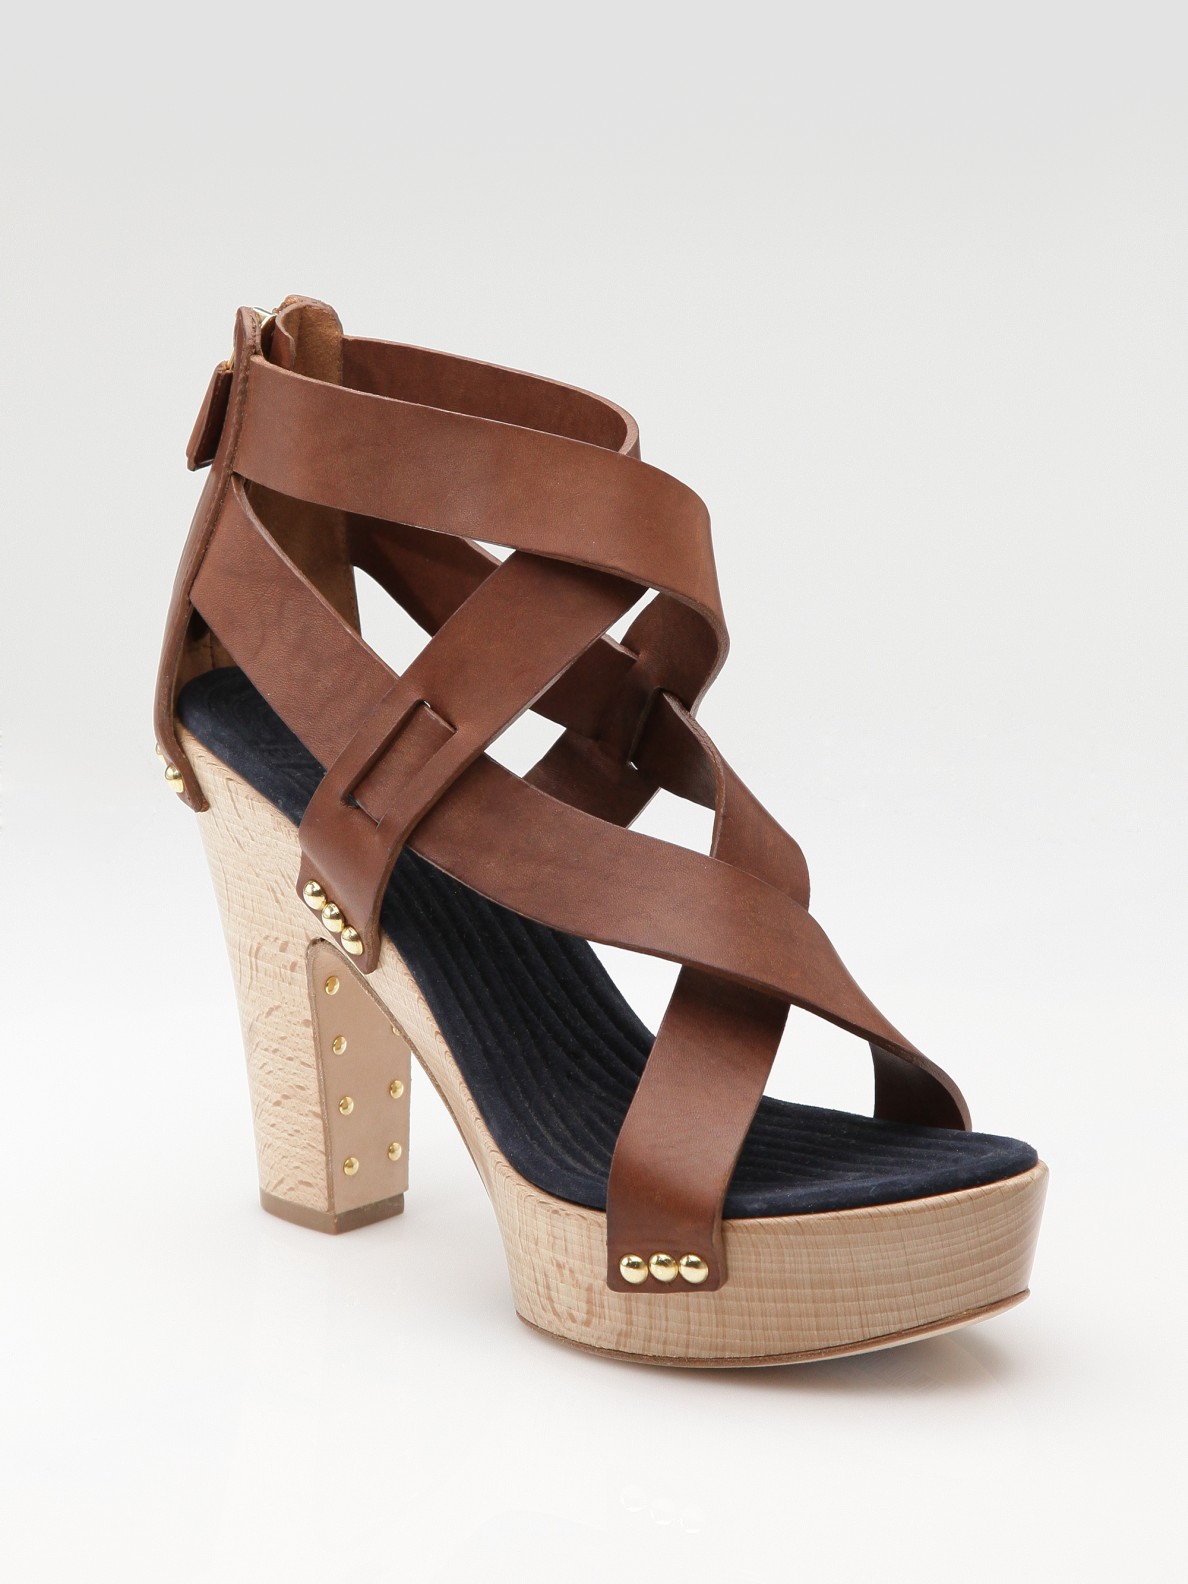 Givenchy Criss-cross Strappy Clog Sandals in Brown | Lyst